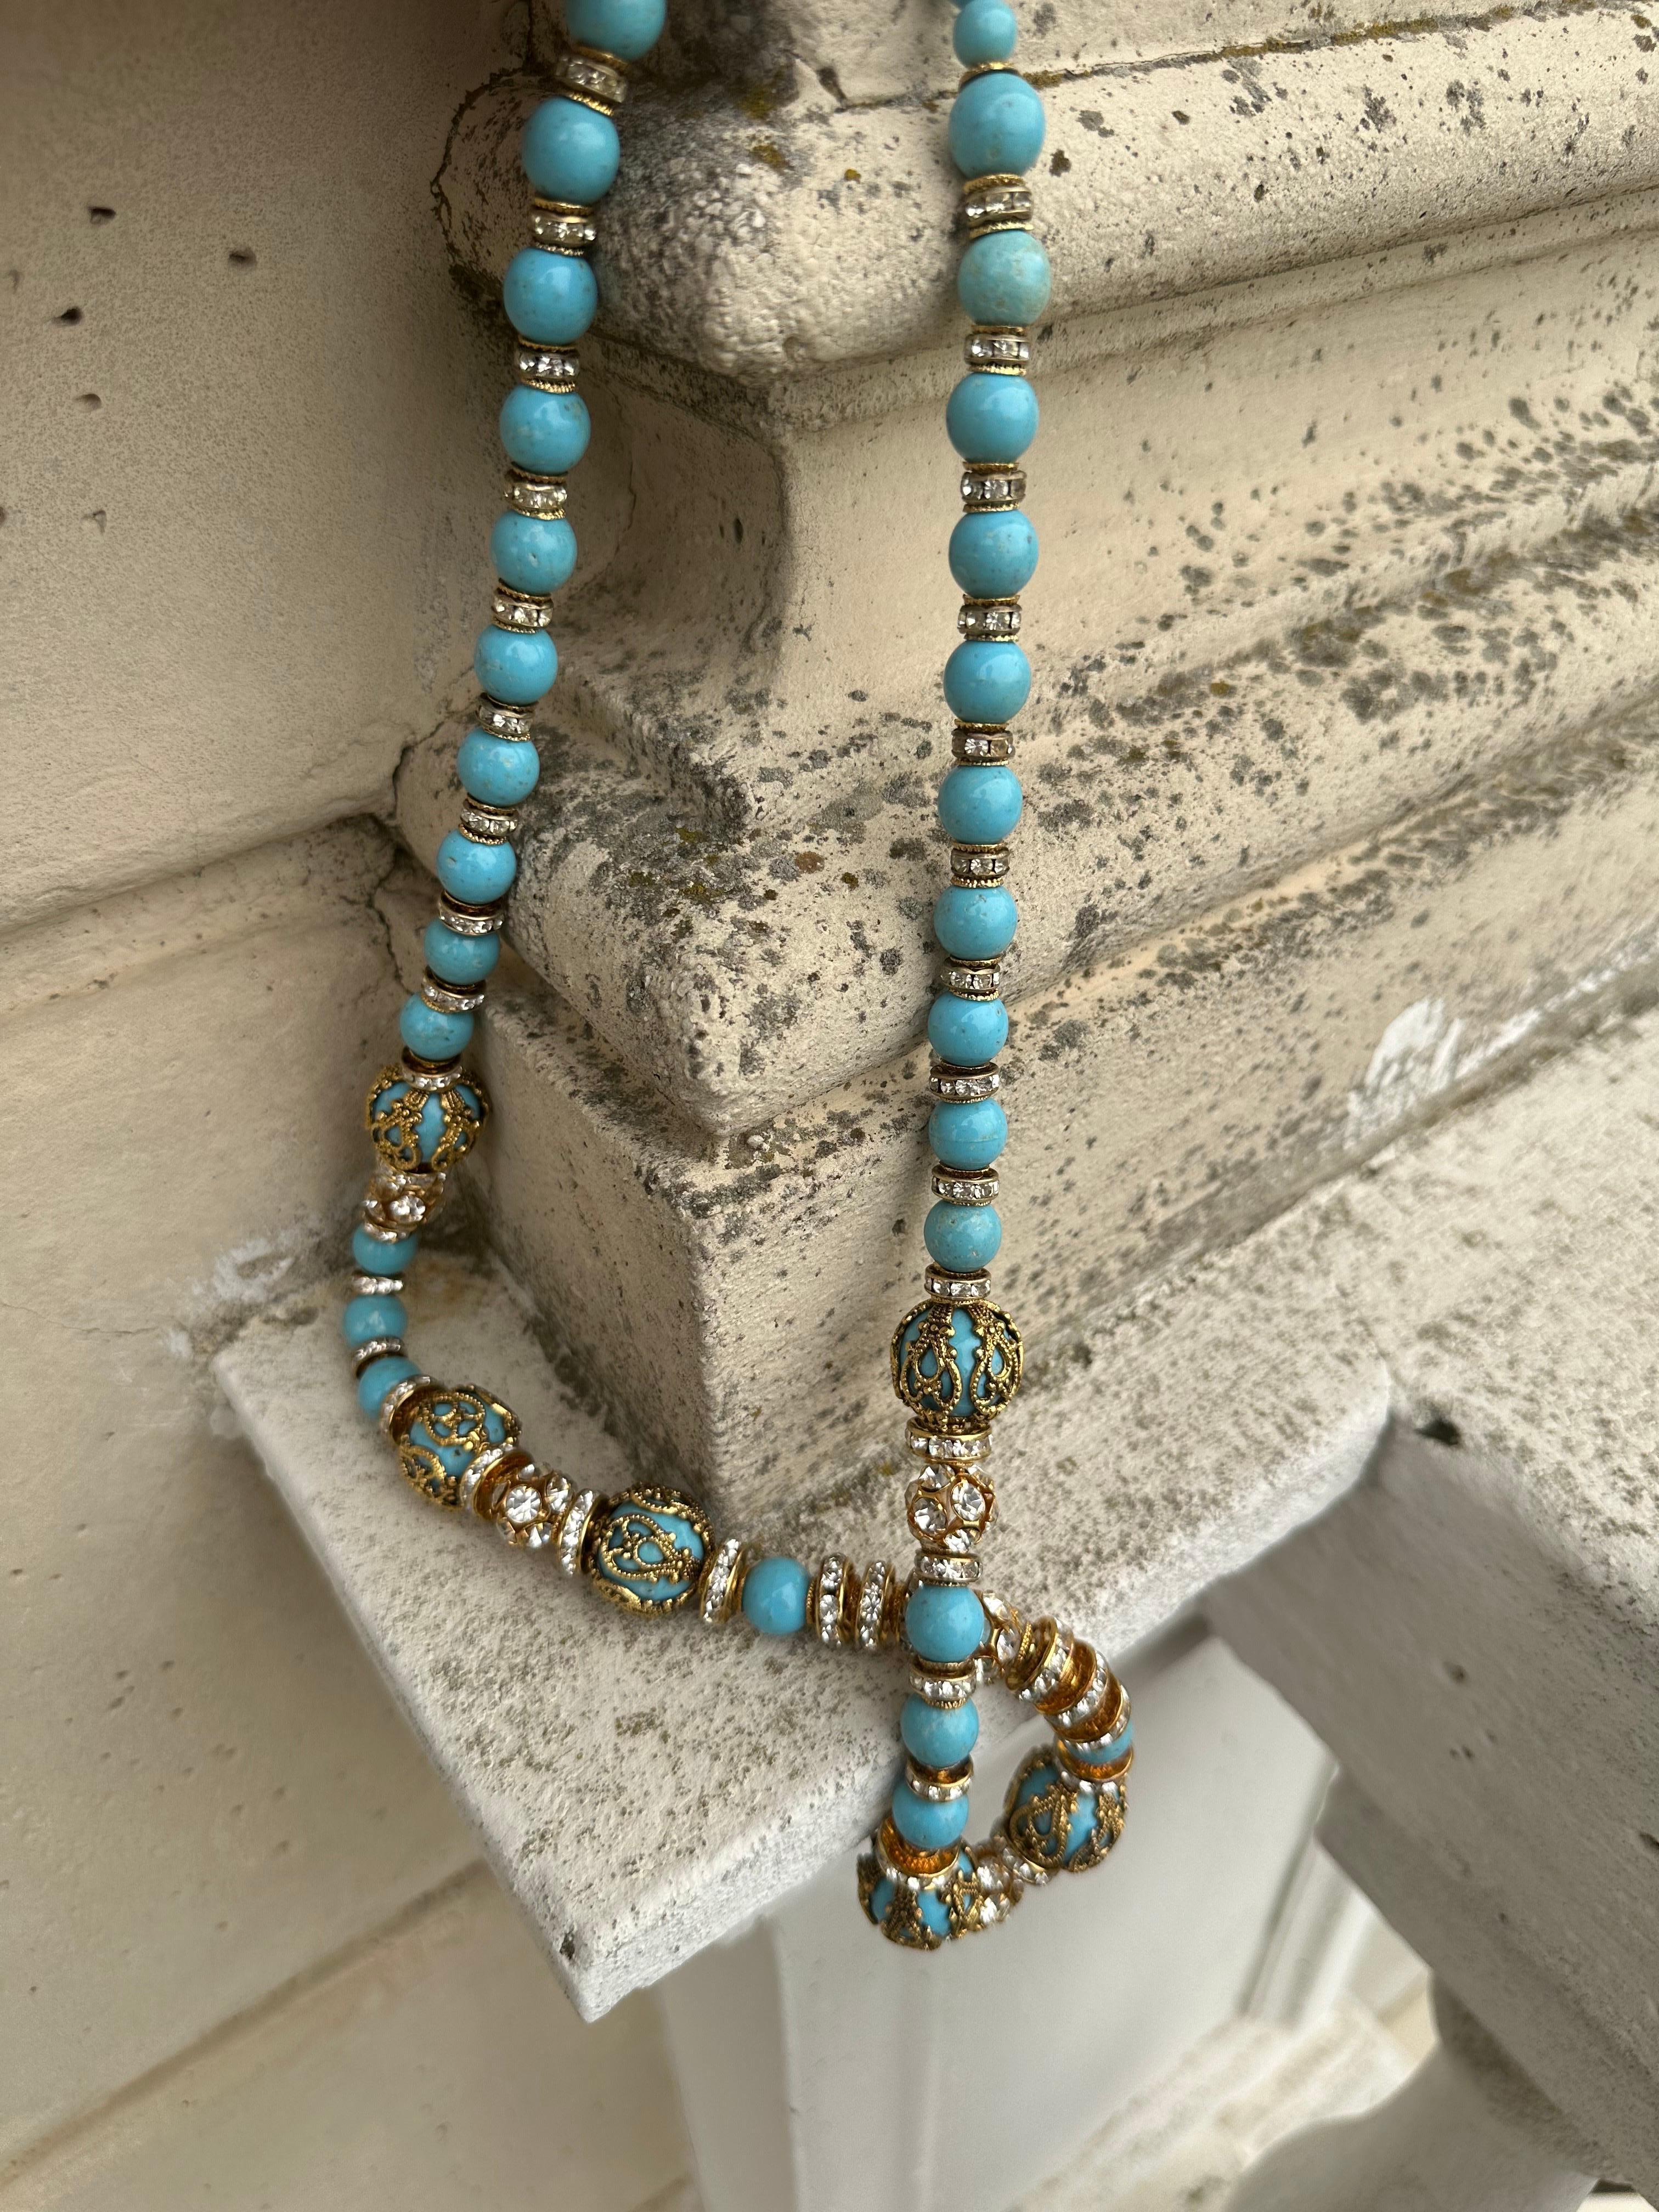 Vintage Valentino 80s necklace with turquoise paste stones and crystals
Gold-colored snap closure with crystals and logo pendant
Length 67cm